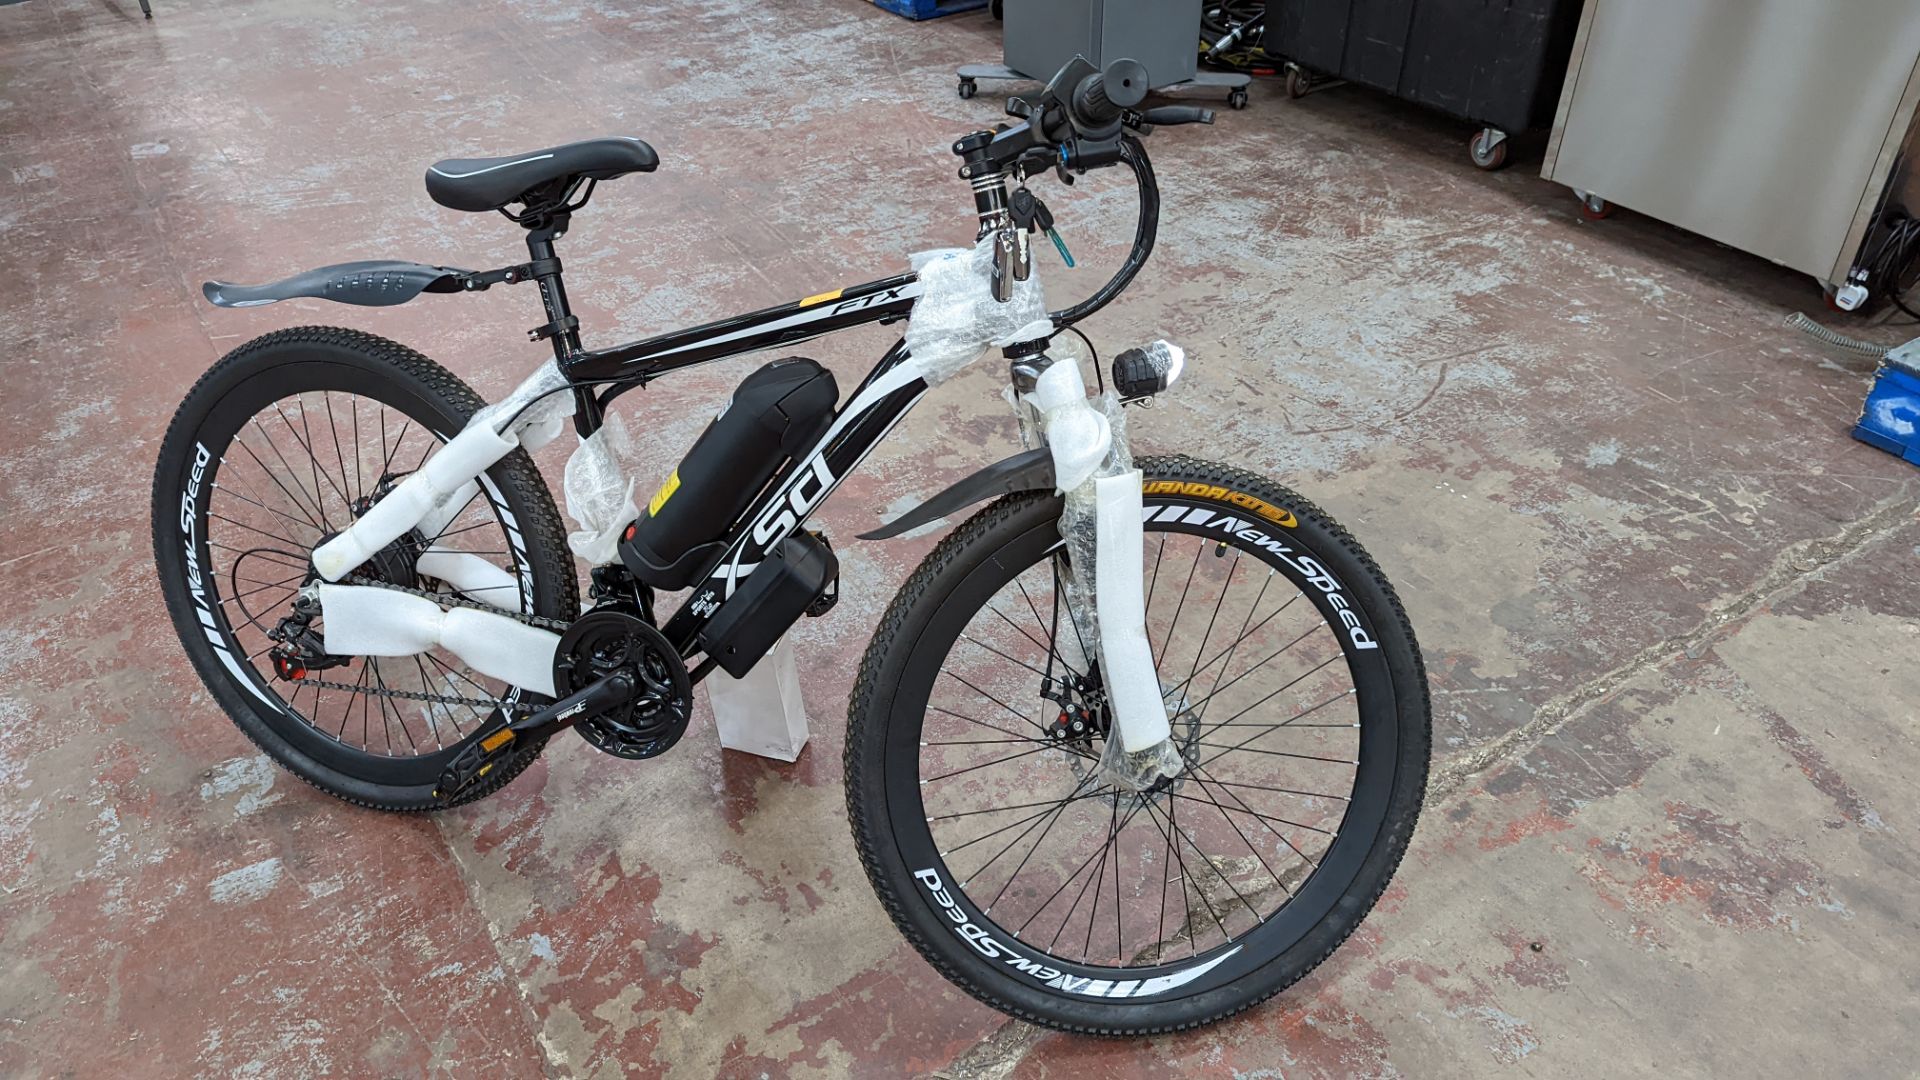 XSD FTX Sport MTB 7.5 Racing electric bike with Shimano Tourney TZ gears. Includes 36v 12AH battery, - Image 7 of 26